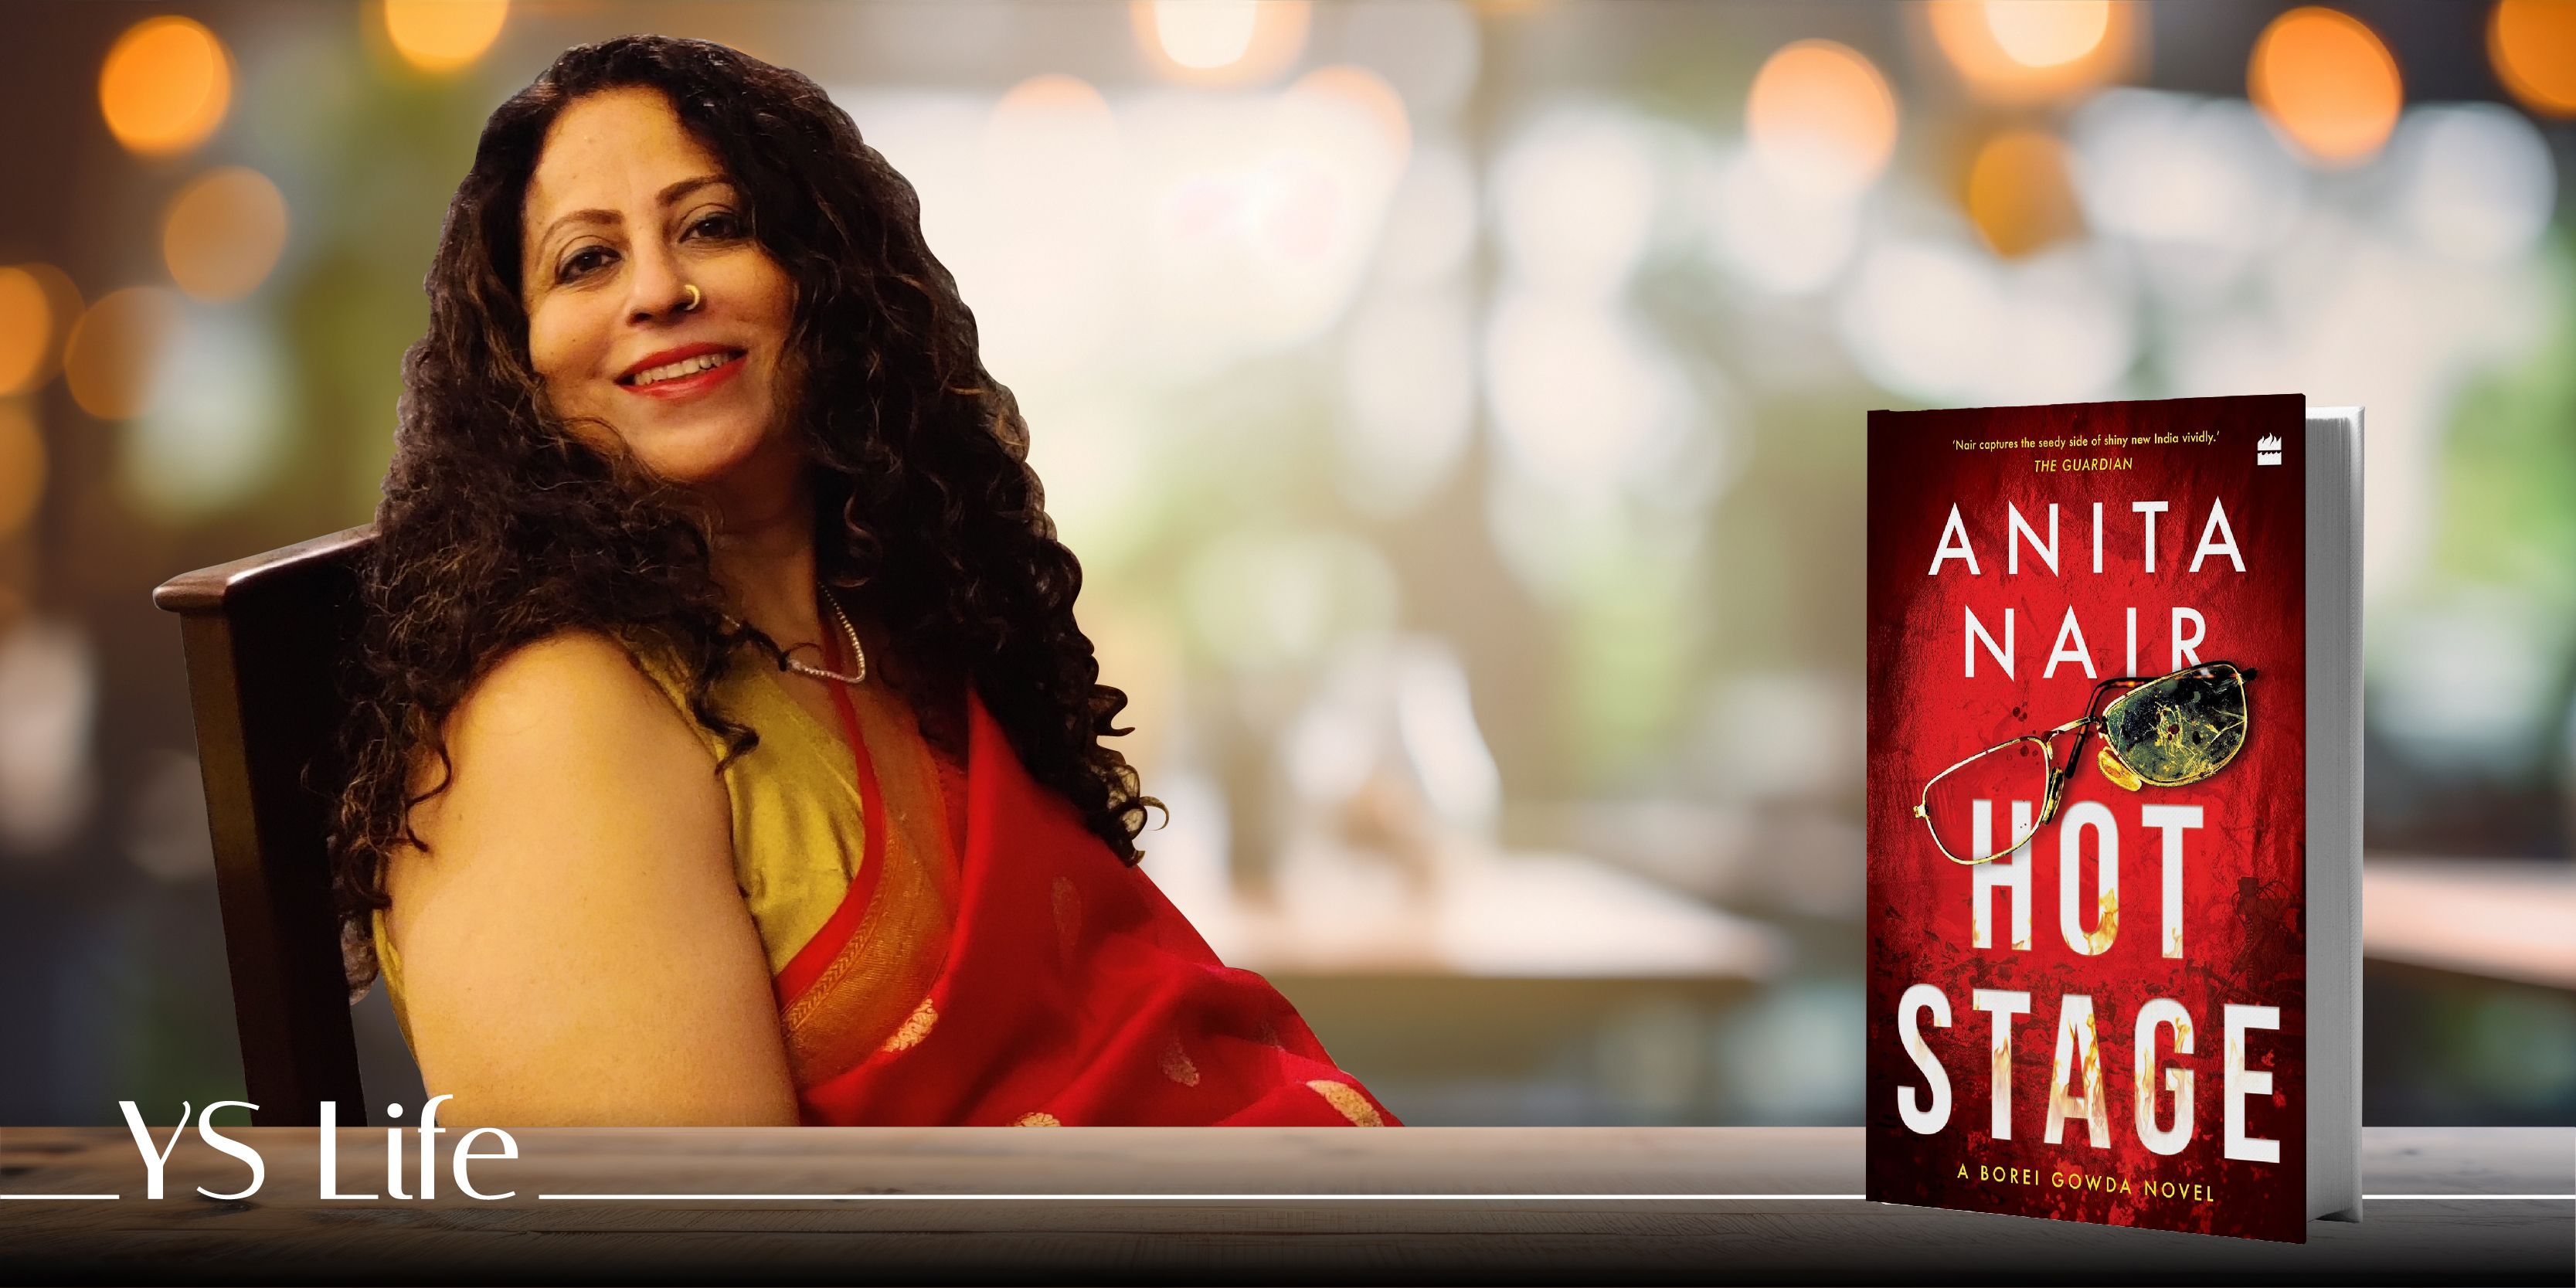 Author Anita Nair on her latest book ‘Hot Stage’ and the craft of writing